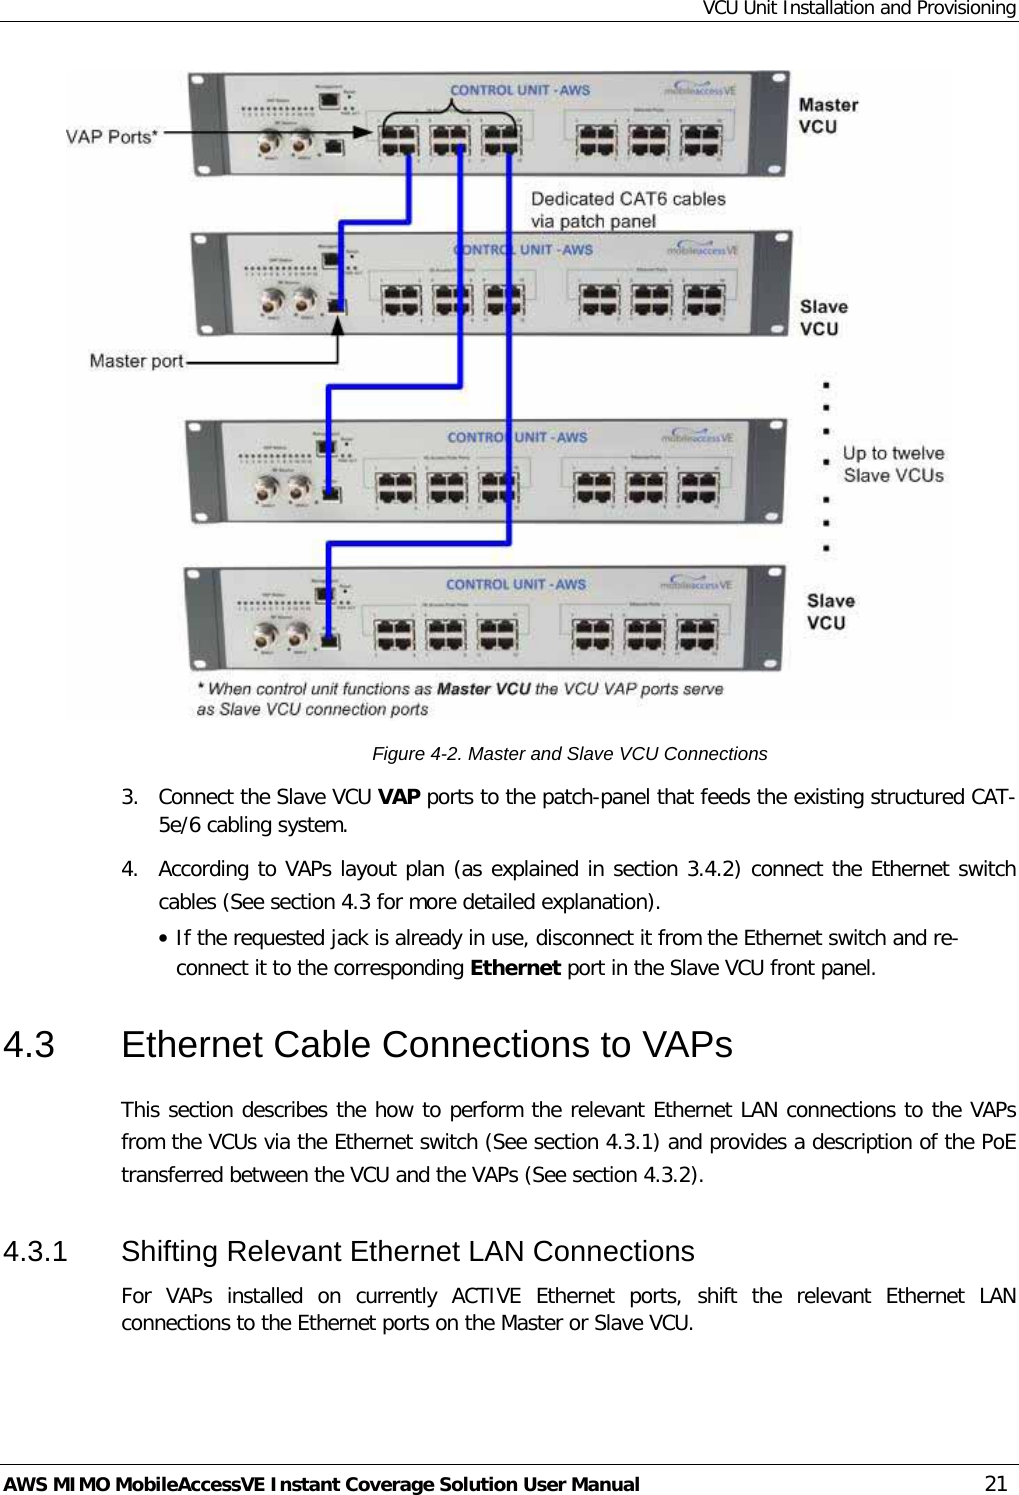 VCU Unit Installation and Provisioning AWS MIMO MobileAccessVE Instant Coverage Solution User Manual  21  Figure  4-2. Master and Slave VCU Connections 3.  Connect the Slave VCU VAP ports to the patch-panel that feeds the existing structured CAT-5e/6 cabling system. 4.  According to VAPs layout plan (as explained in section  3.4.2) connect the Ethernet switch cables (See section  4.3 for more detailed explanation). • If the requested jack is already in use, disconnect it from the Ethernet switch and re-connect it to the corresponding Ethernet port in the Slave VCU front panel. 4.3  Ethernet Cable Connections to VAPs This section describes the how to perform the relevant Ethernet LAN connections to the VAPs from the VCUs via the Ethernet switch (See section  4.3.1) and provides a description of the PoE transferred between the VCU and the VAPs (See section  4.3.2). 4.3.1  Shifting Relevant Ethernet LAN Connections For VAPs installed on currently ACTIVE Ethernet ports, shift the relevant Ethernet LAN connections to the Ethernet ports on the Master or Slave VCU.   